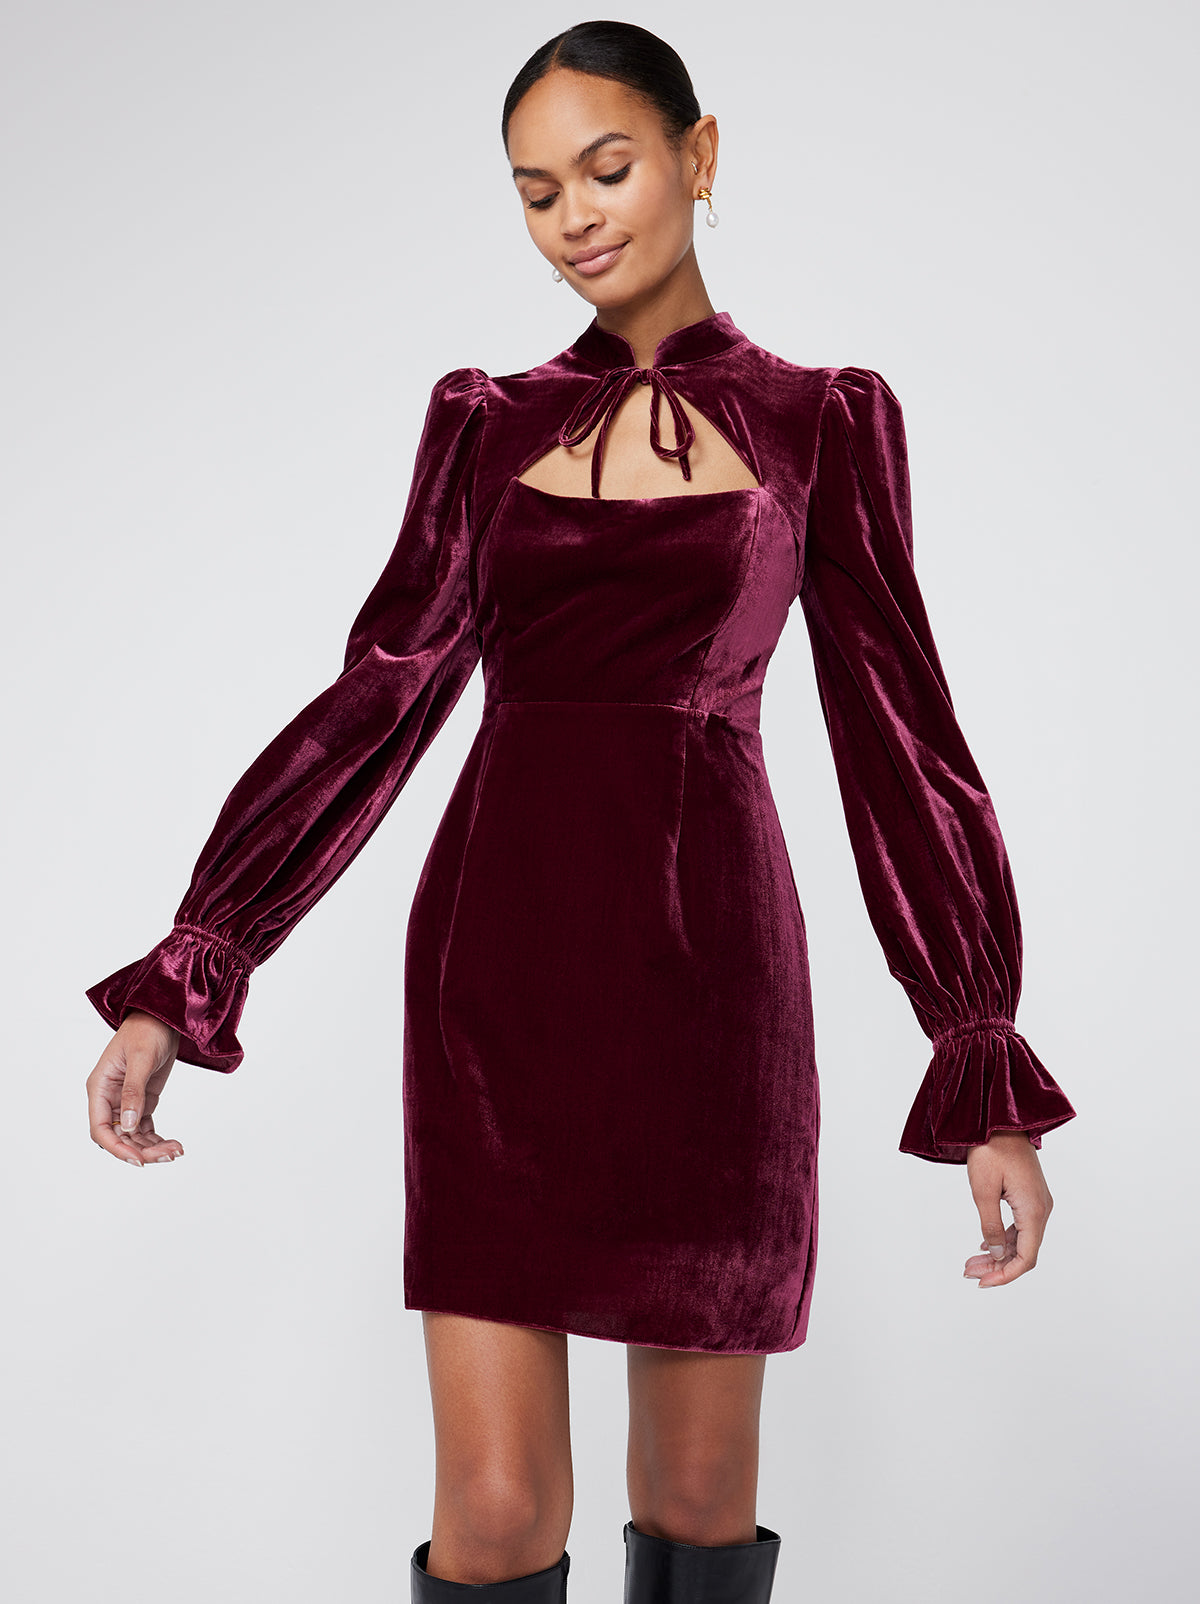 Valentina Burgundy Velvet Mini Dress By KITRI Studio is a sultry sleeved mini dress with a tie detail collar. An ideal party dress option it features puff shoulders and elasticated frilly cuffs - as well as a fitted bodice for a memorable silhouette. Deep dark red velvet fabric looks elegant and expensive.